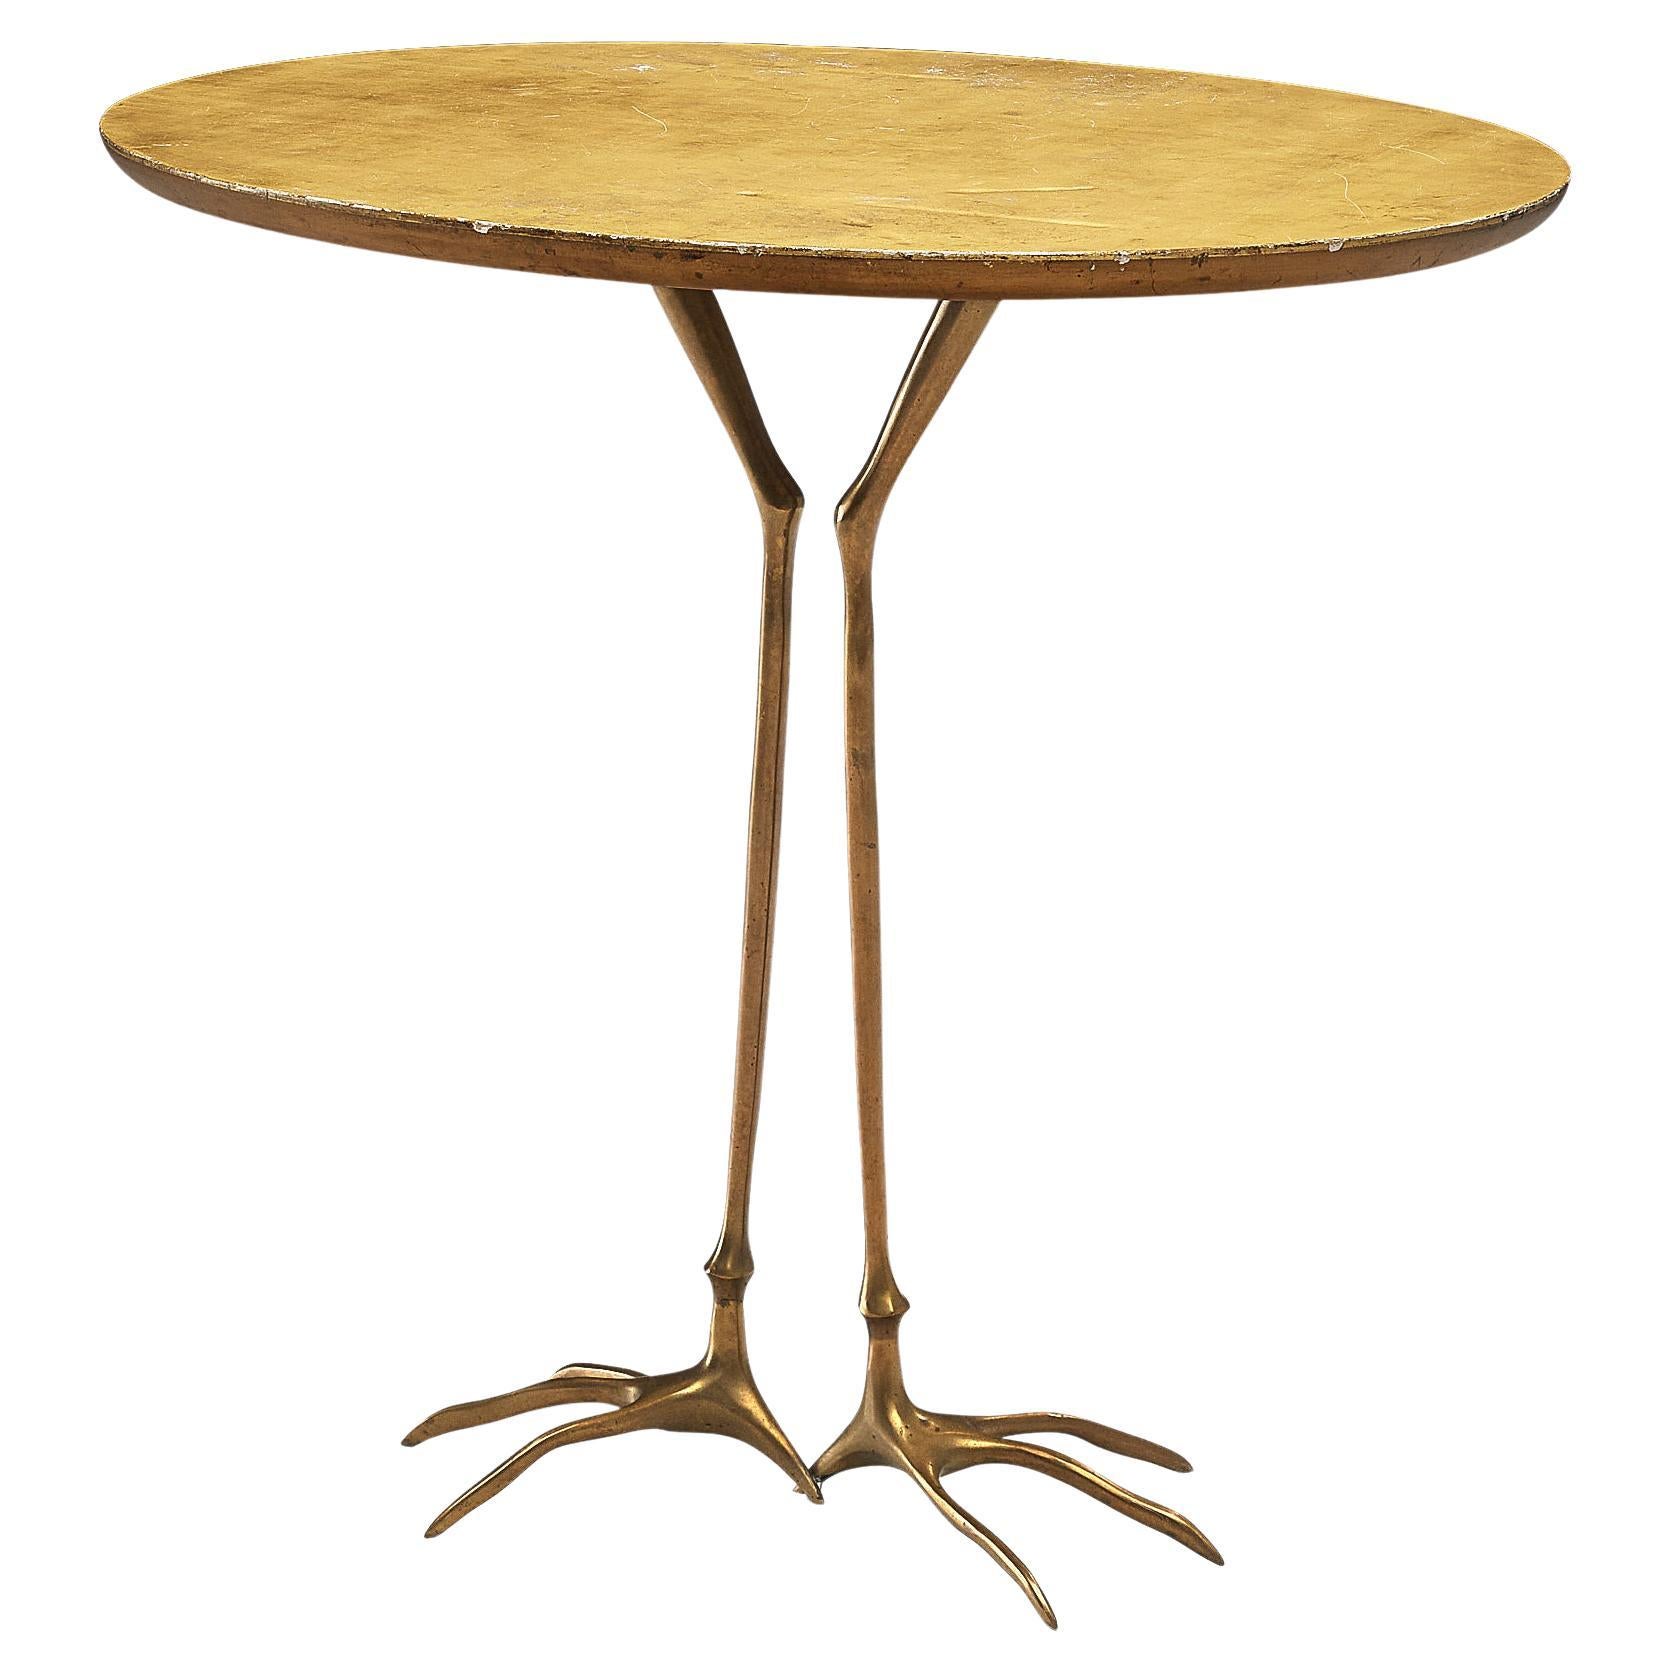 Meret Oppenheim 'Traccia' Coffee Table in Gilded Wood and Brass 